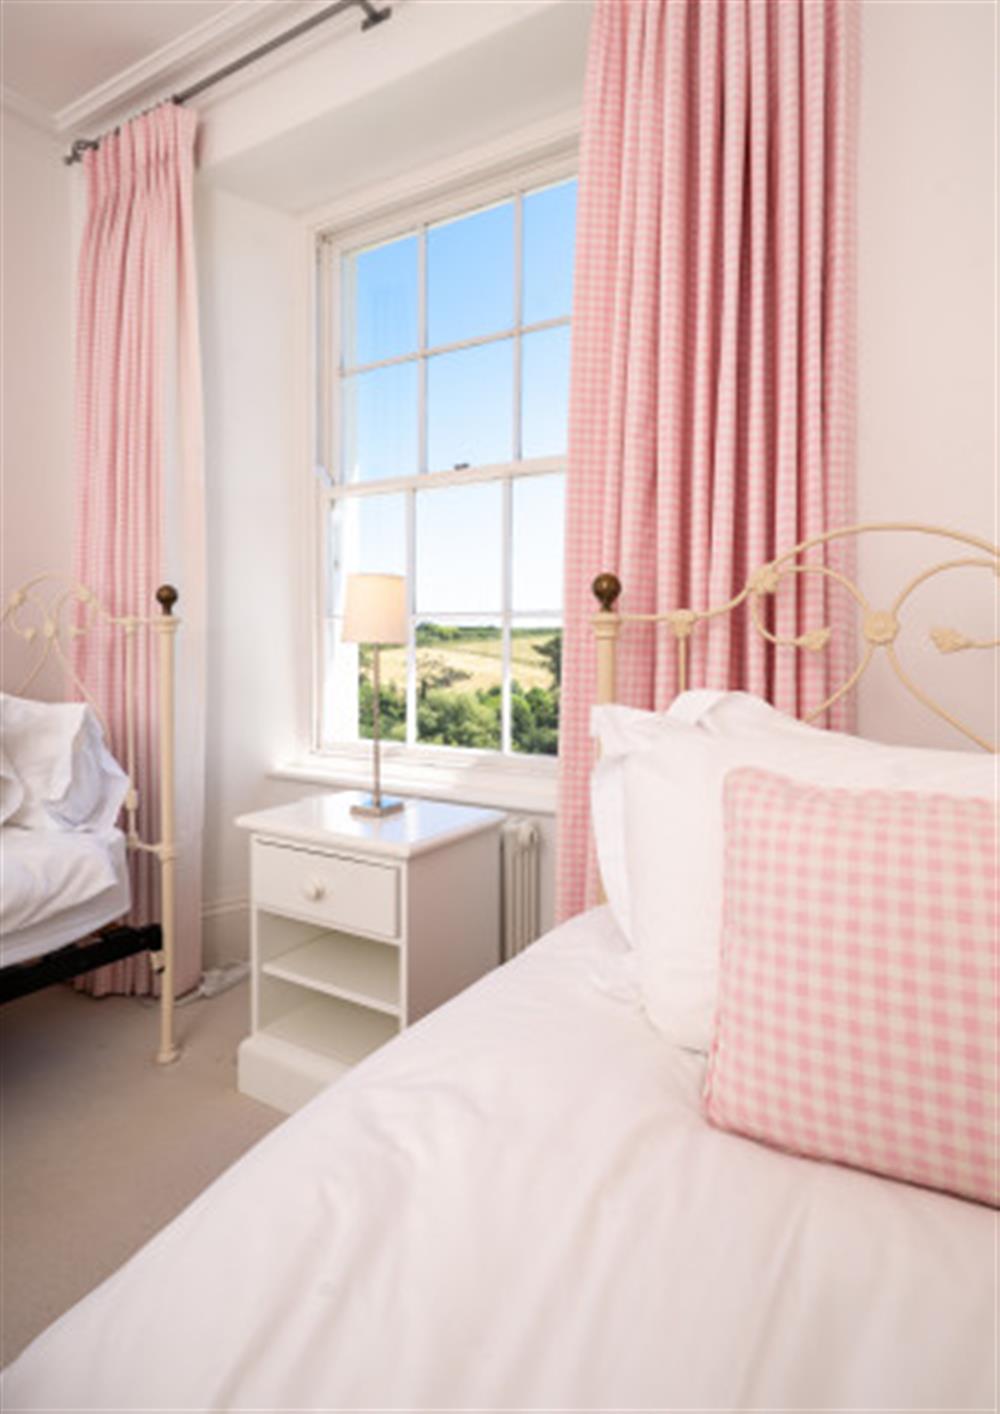 The views are beautiful from all the rooms in this lovely property. at Holset House in East Portlemouth